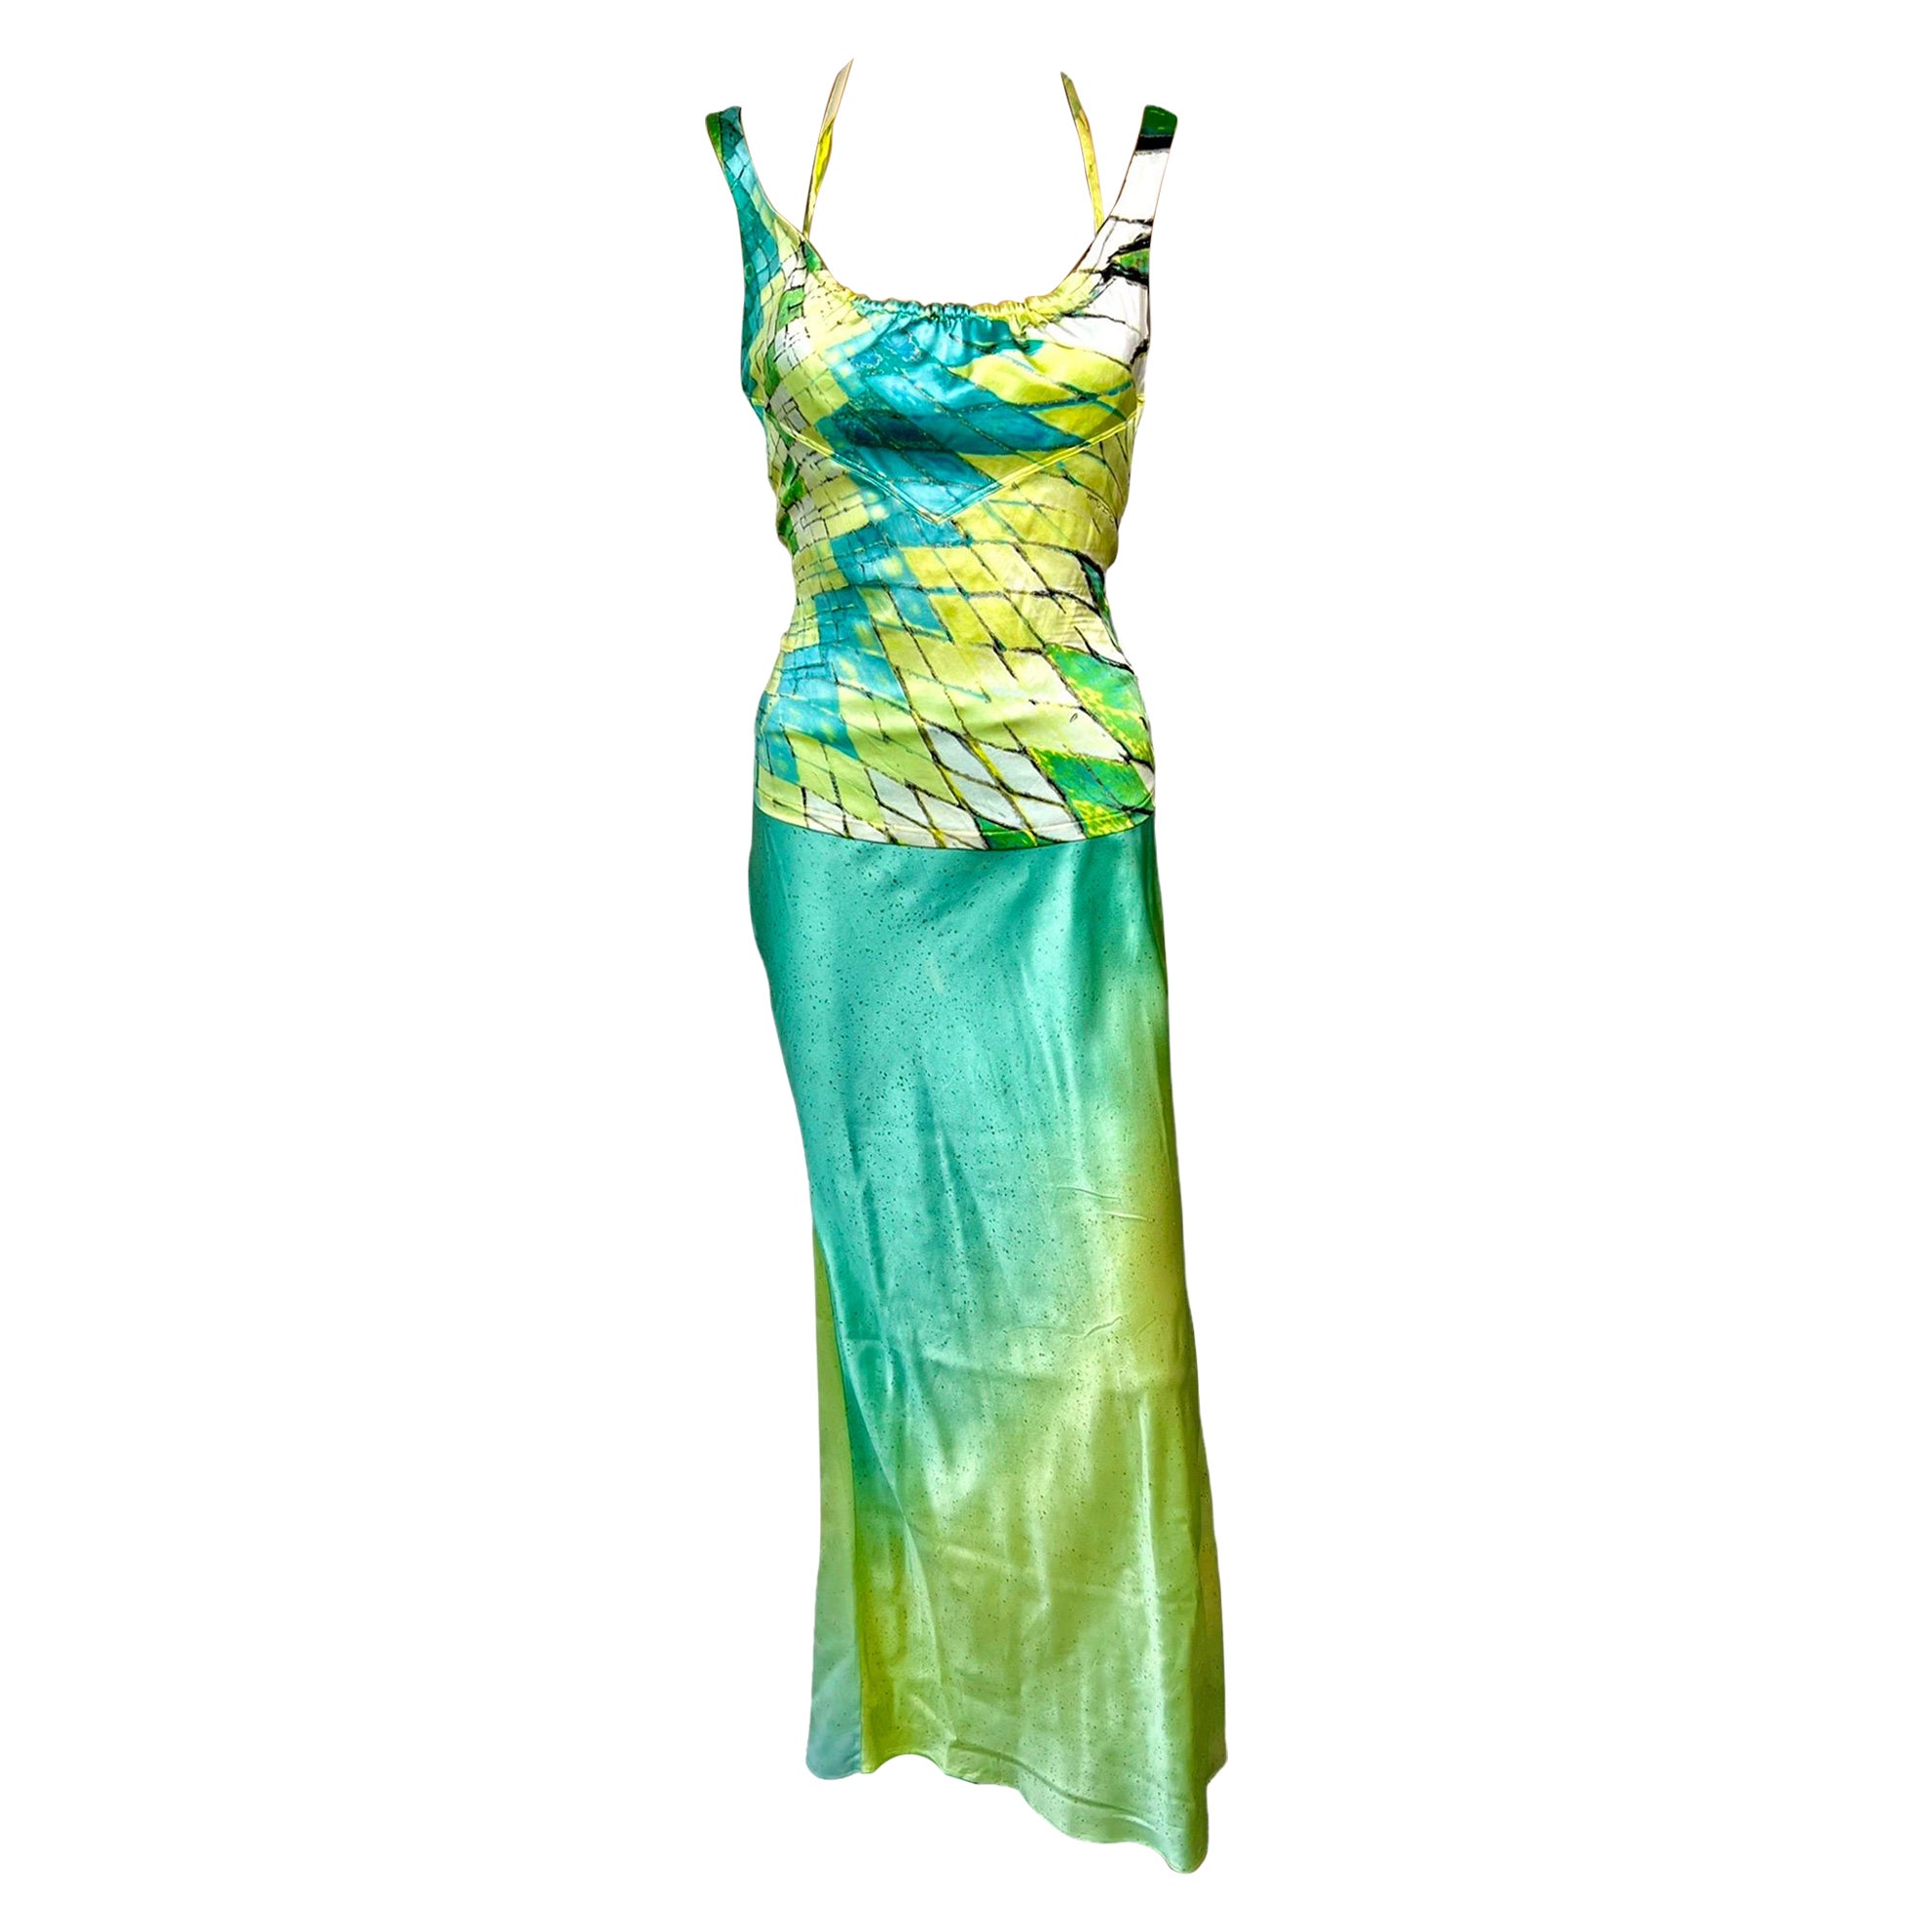 Roberto Cavalli S/S 2004 Feather Embellished Halter Top & Maxi Skirt 2 Piece Set For Sale